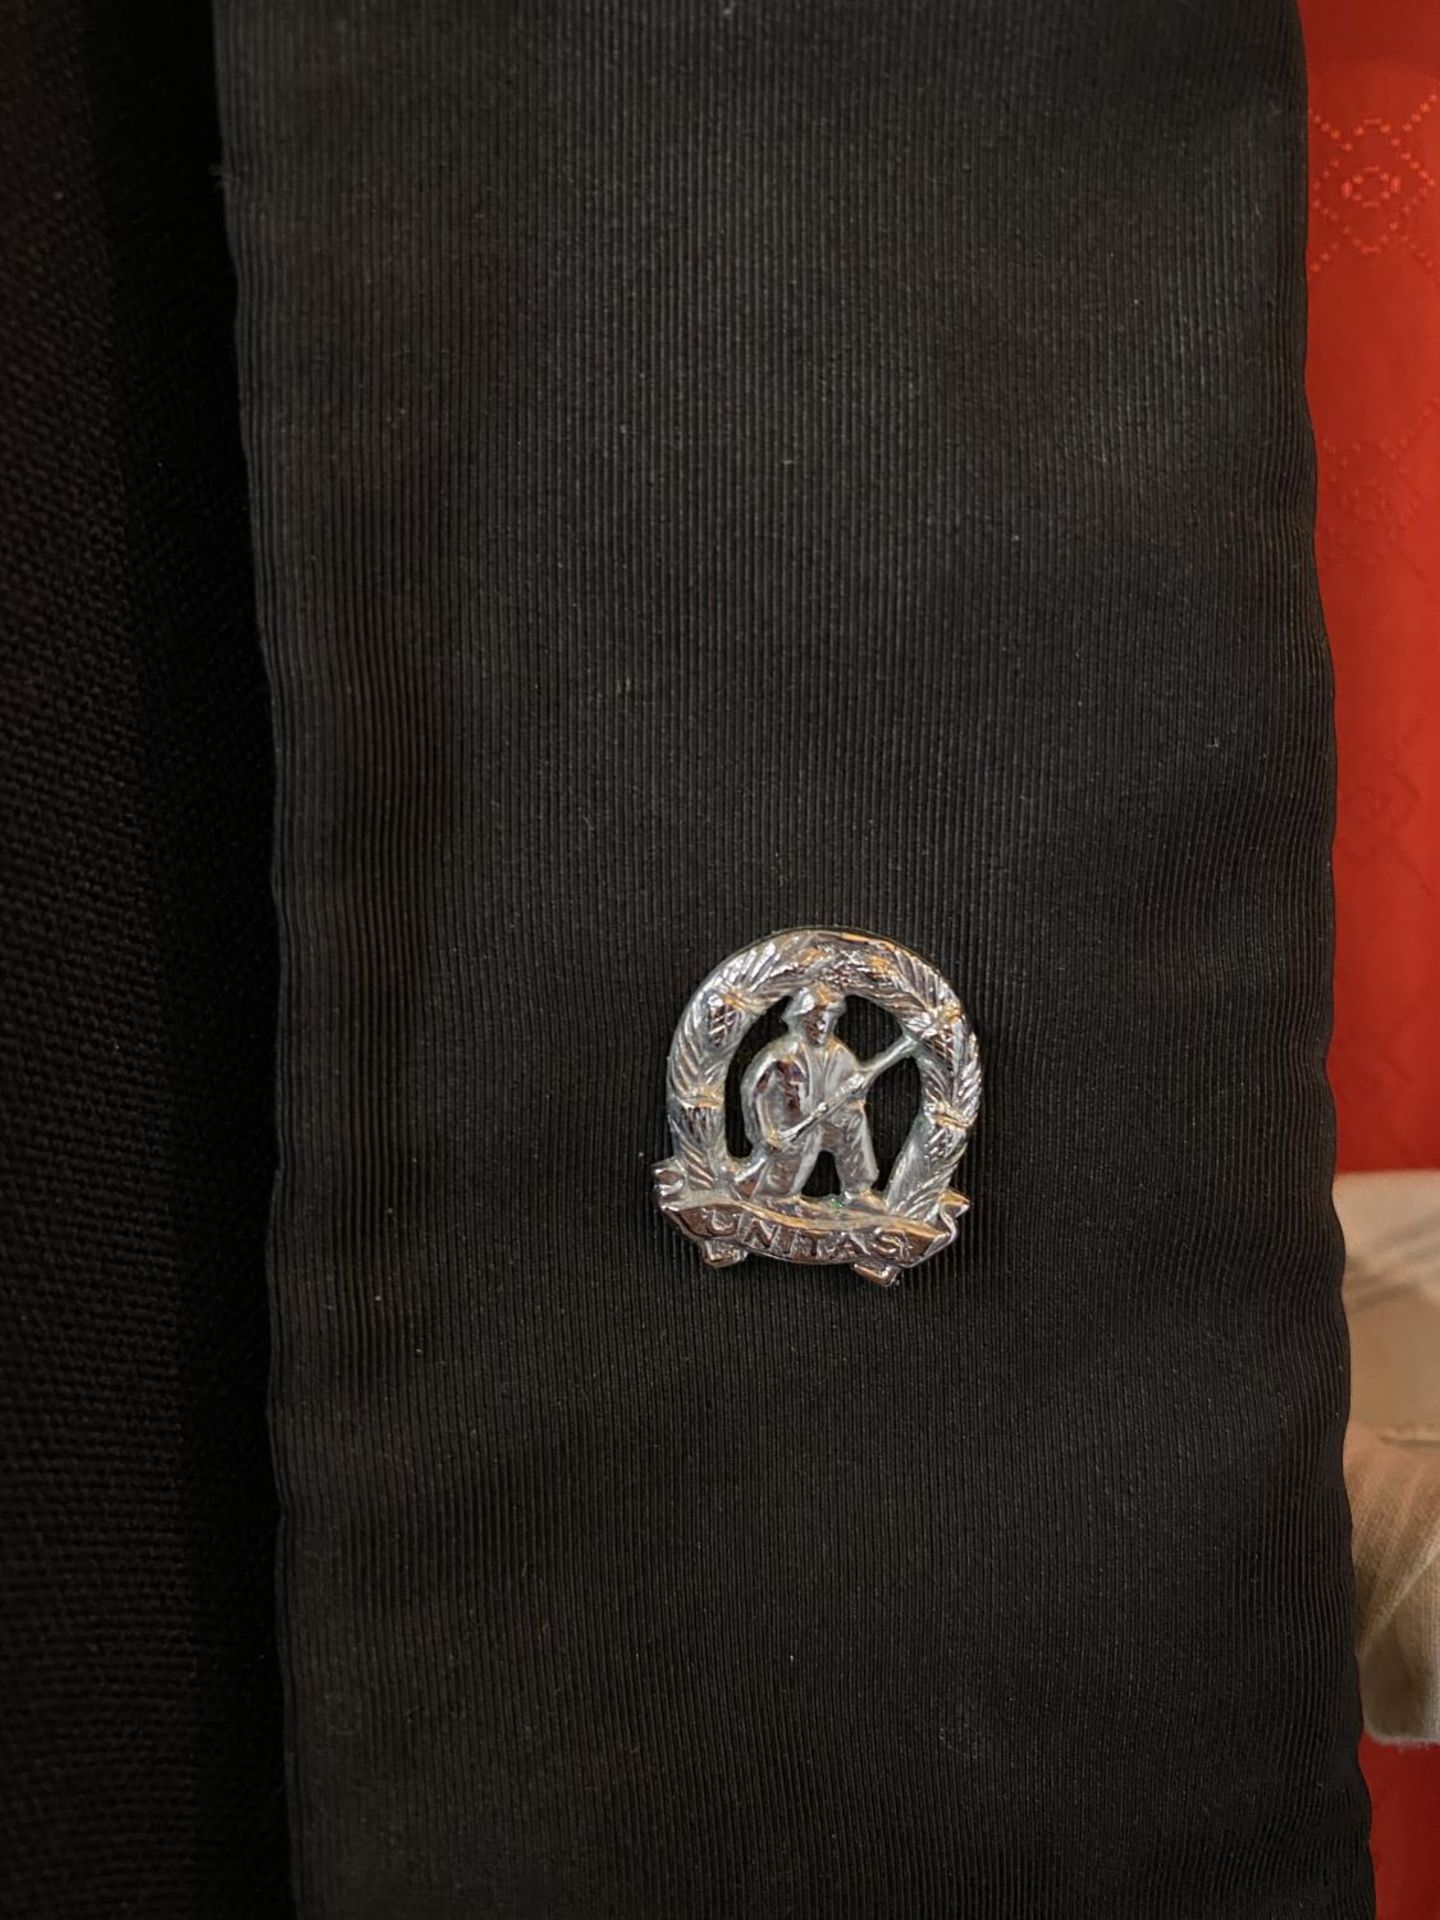 A SOUTH AFRICAN ARMY DINNER JACKET WITH EX UNITAS VIRES EMBLEMS - Image 3 of 4